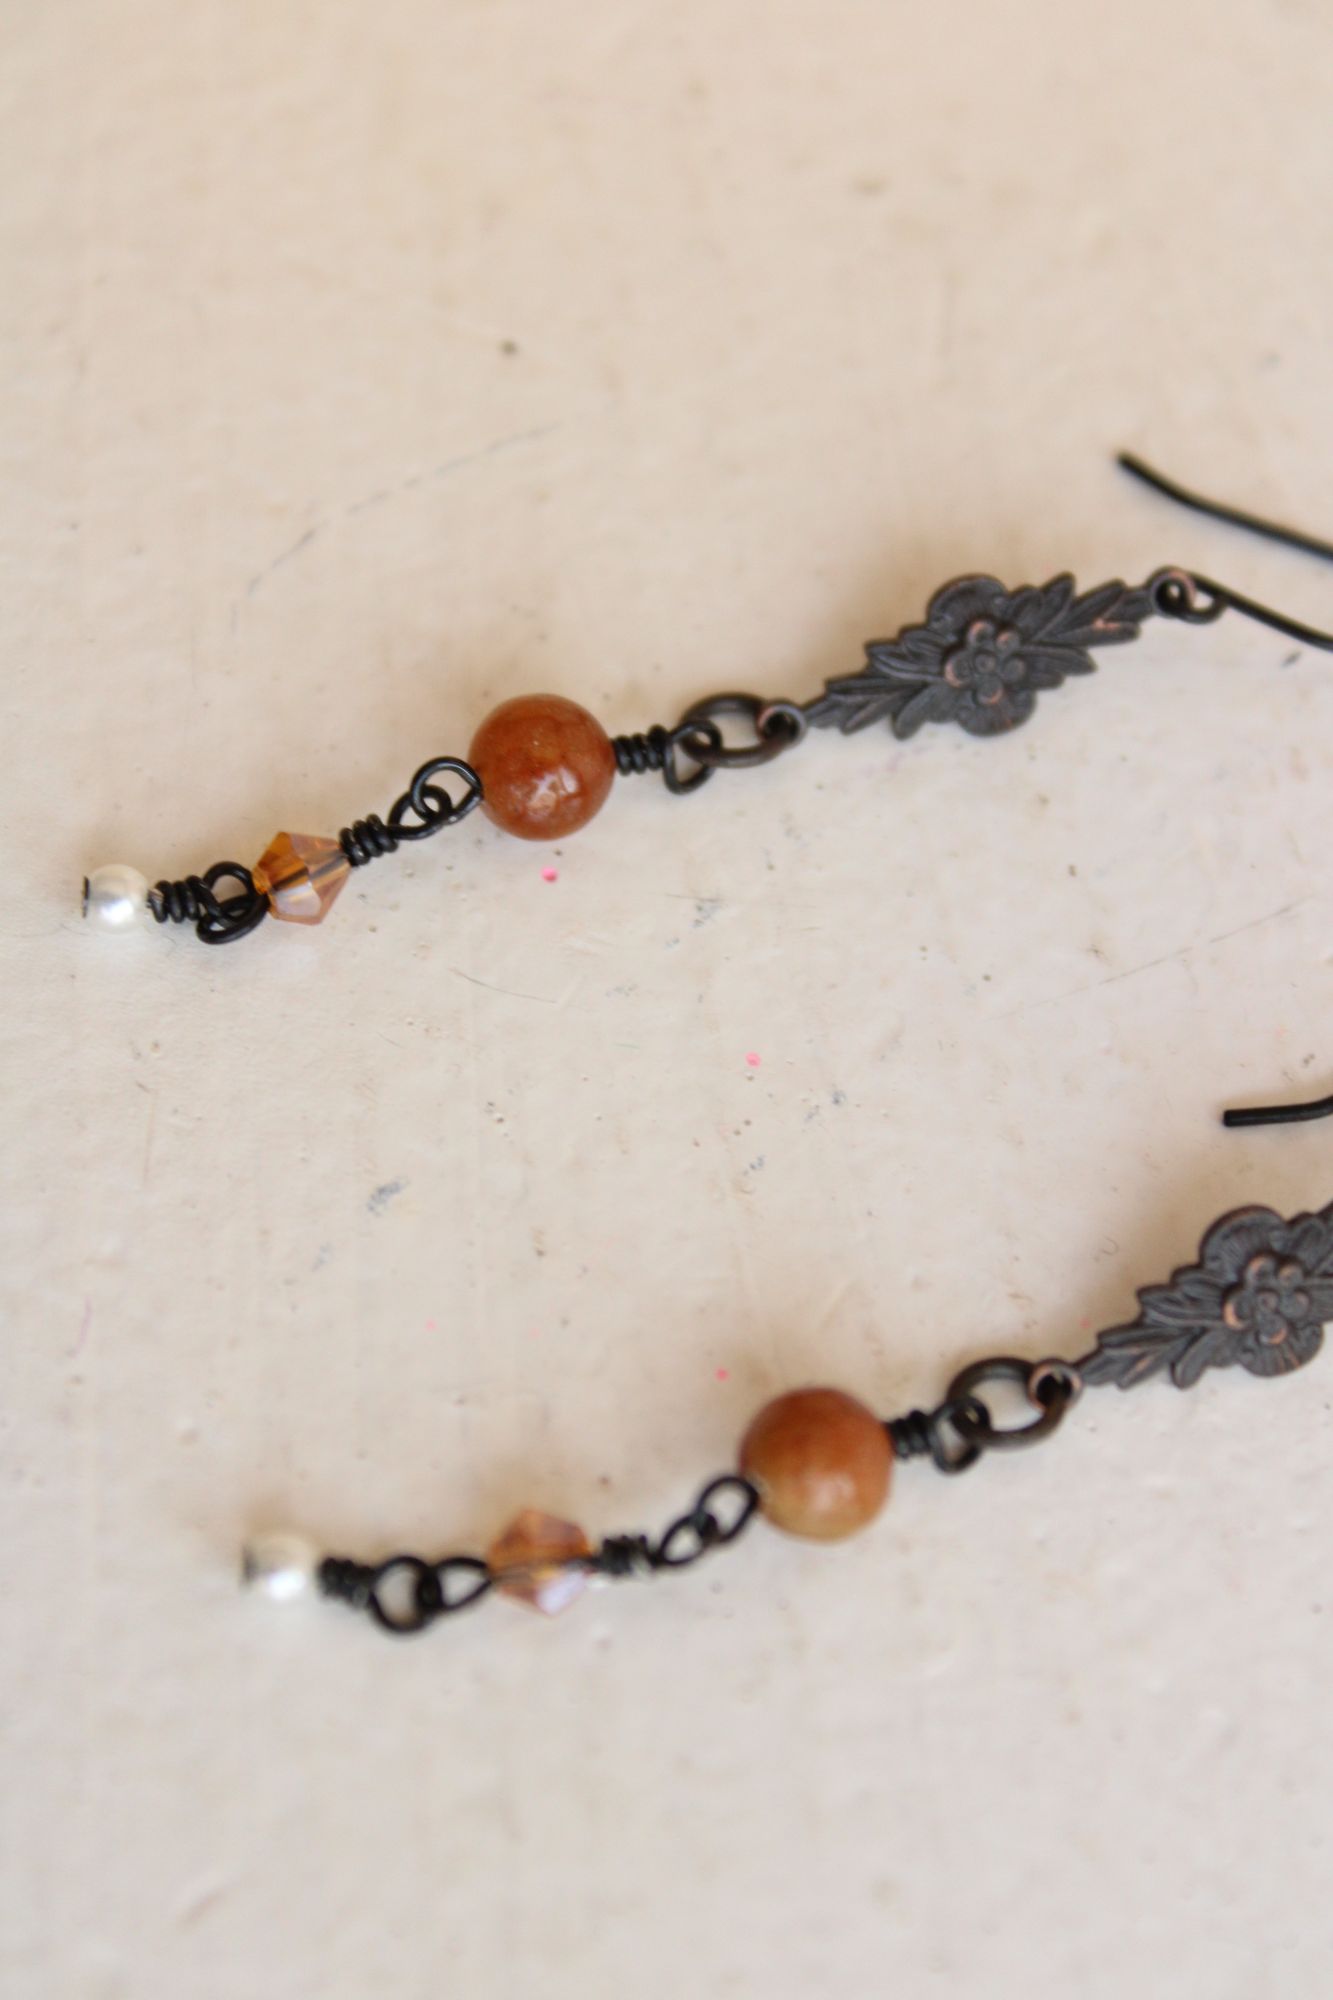 Handmade Women's Earrings, Black Metal with Brown Beads and a Faux Pearl Dangles